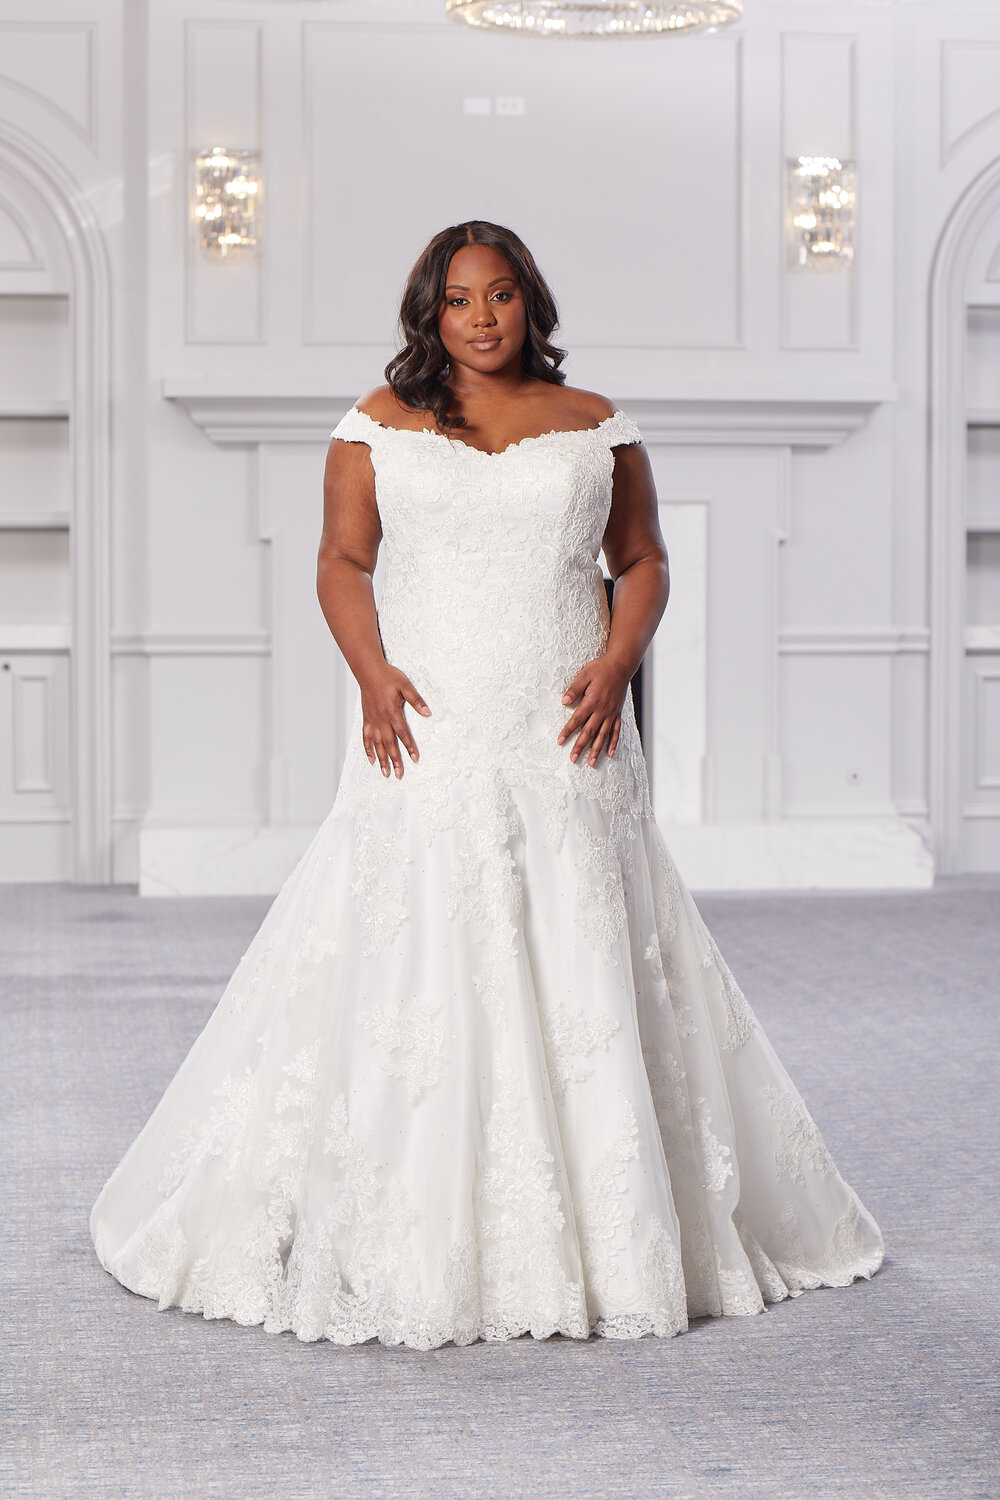 Embrace Your Body: How to Choose the Perfect Wedding Dress as a